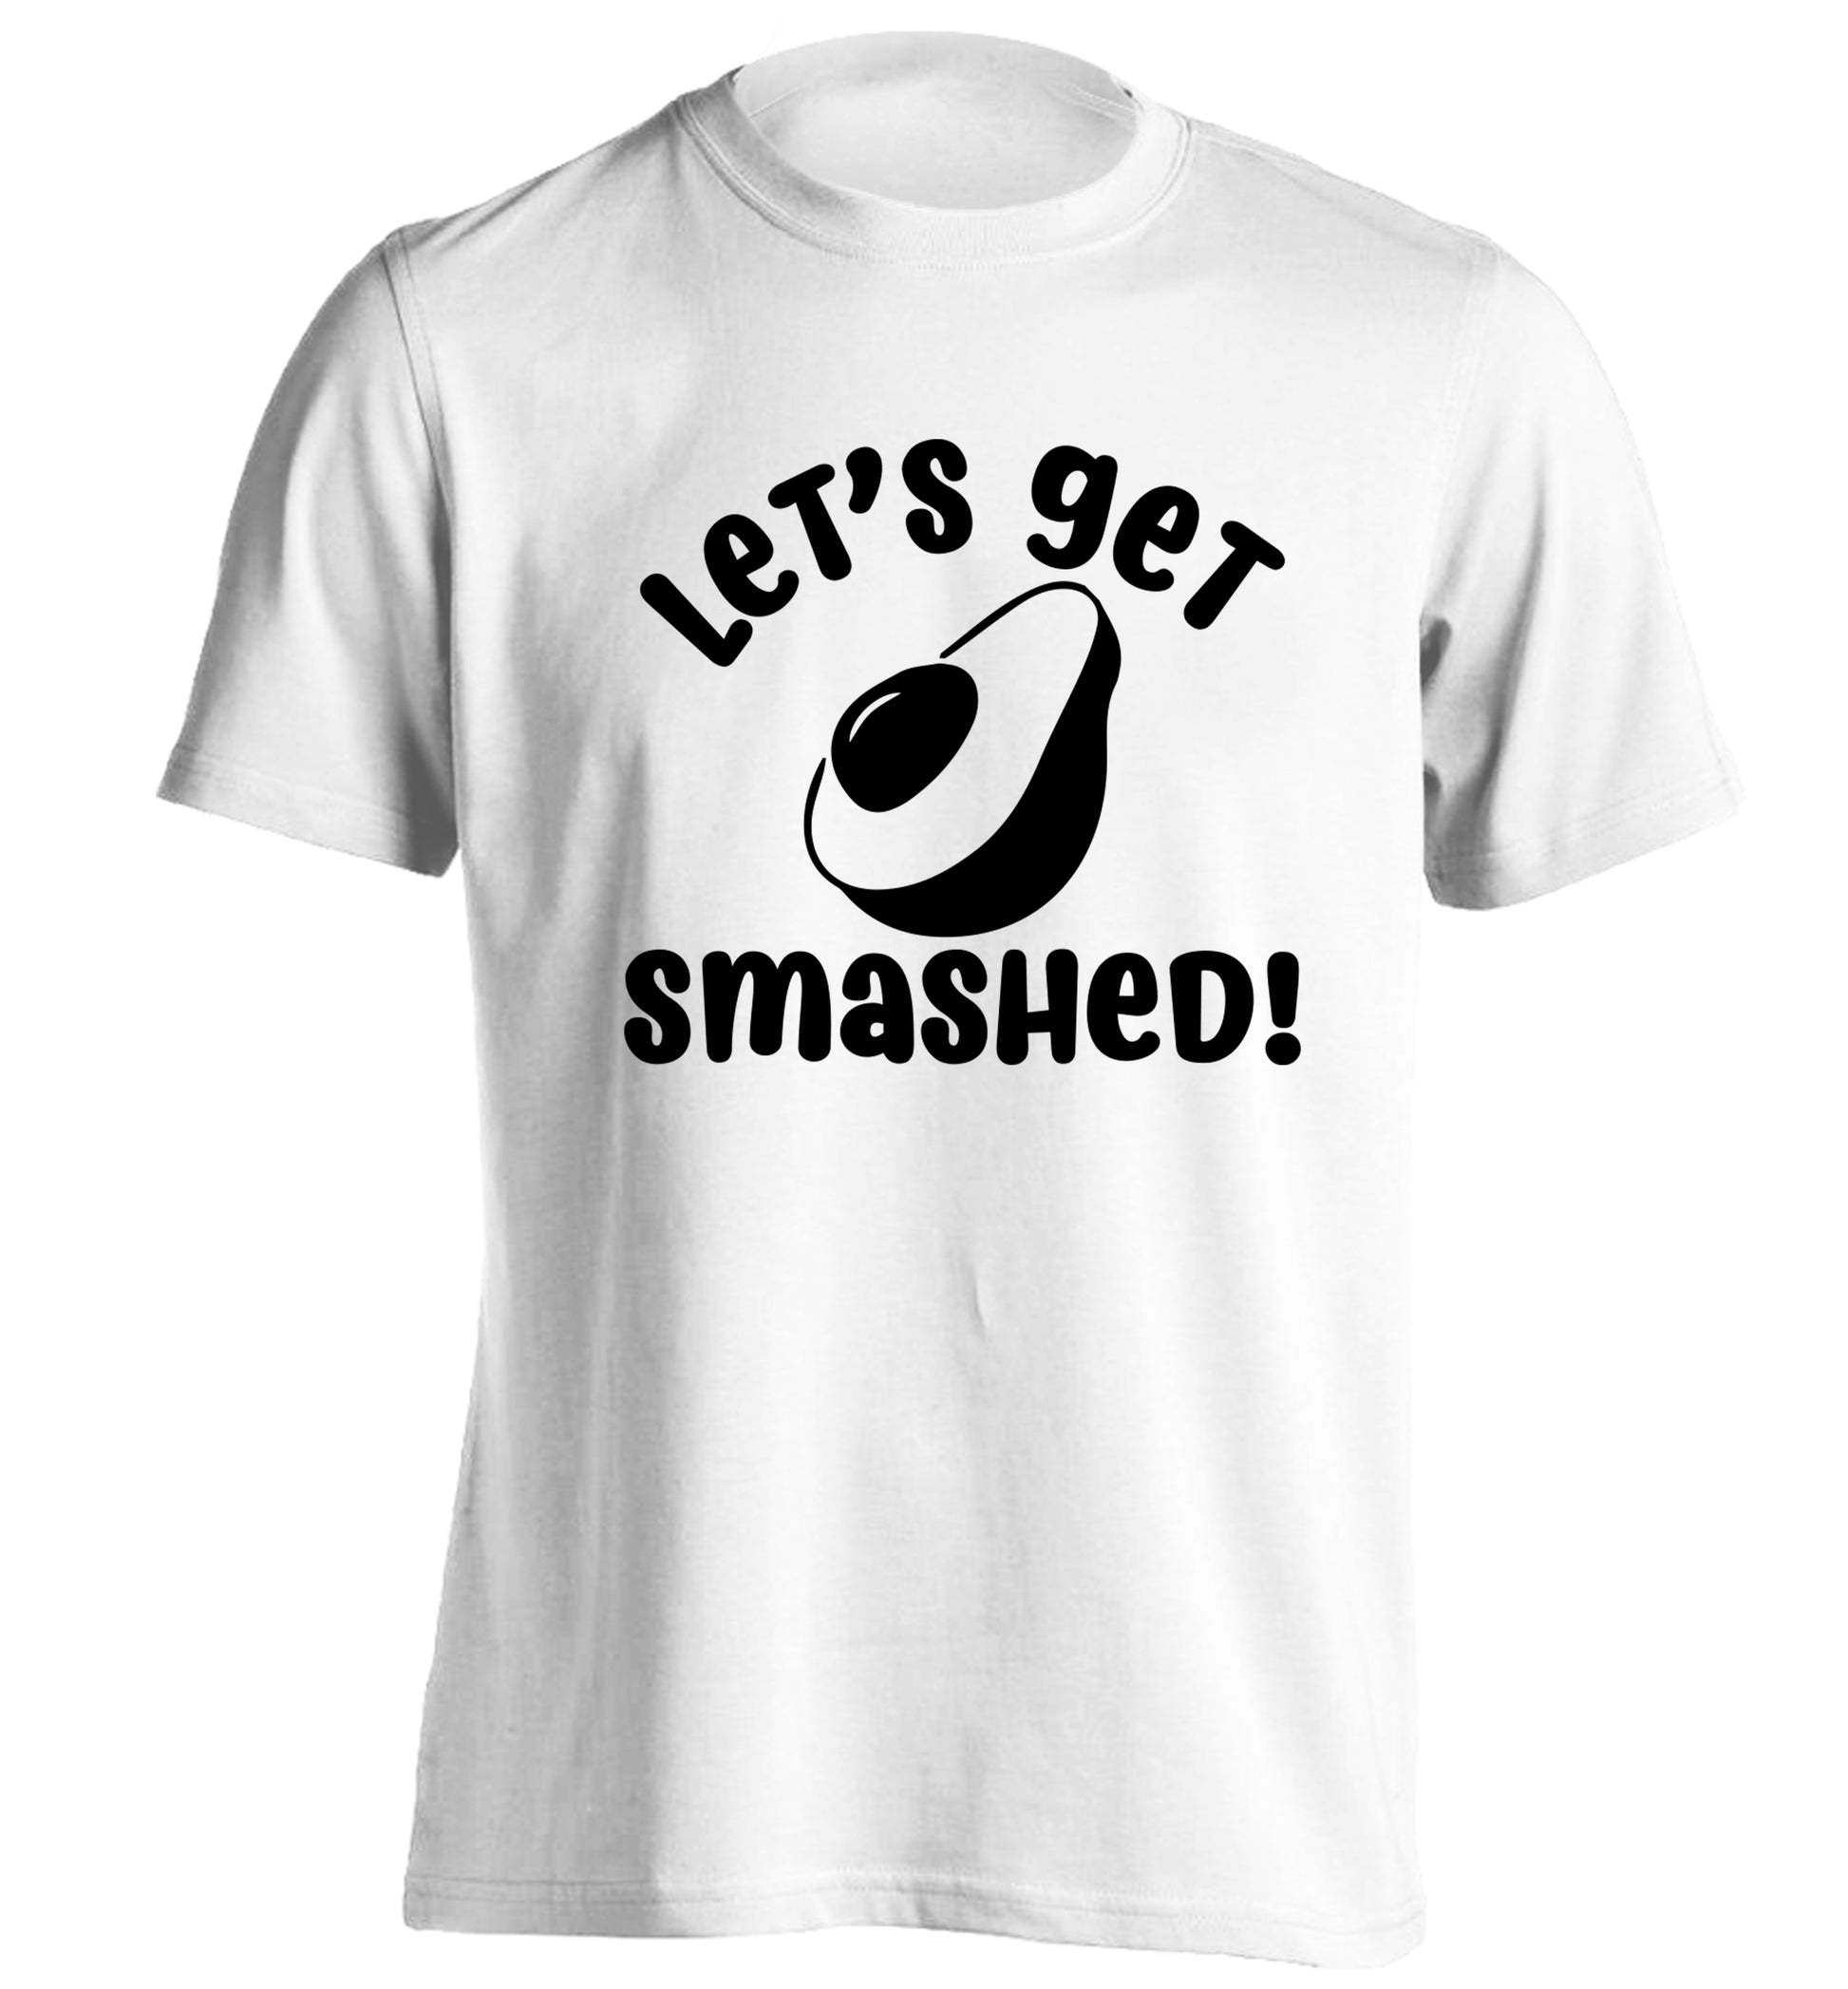 Let's get smashed adults unisex white Tshirt 2XL